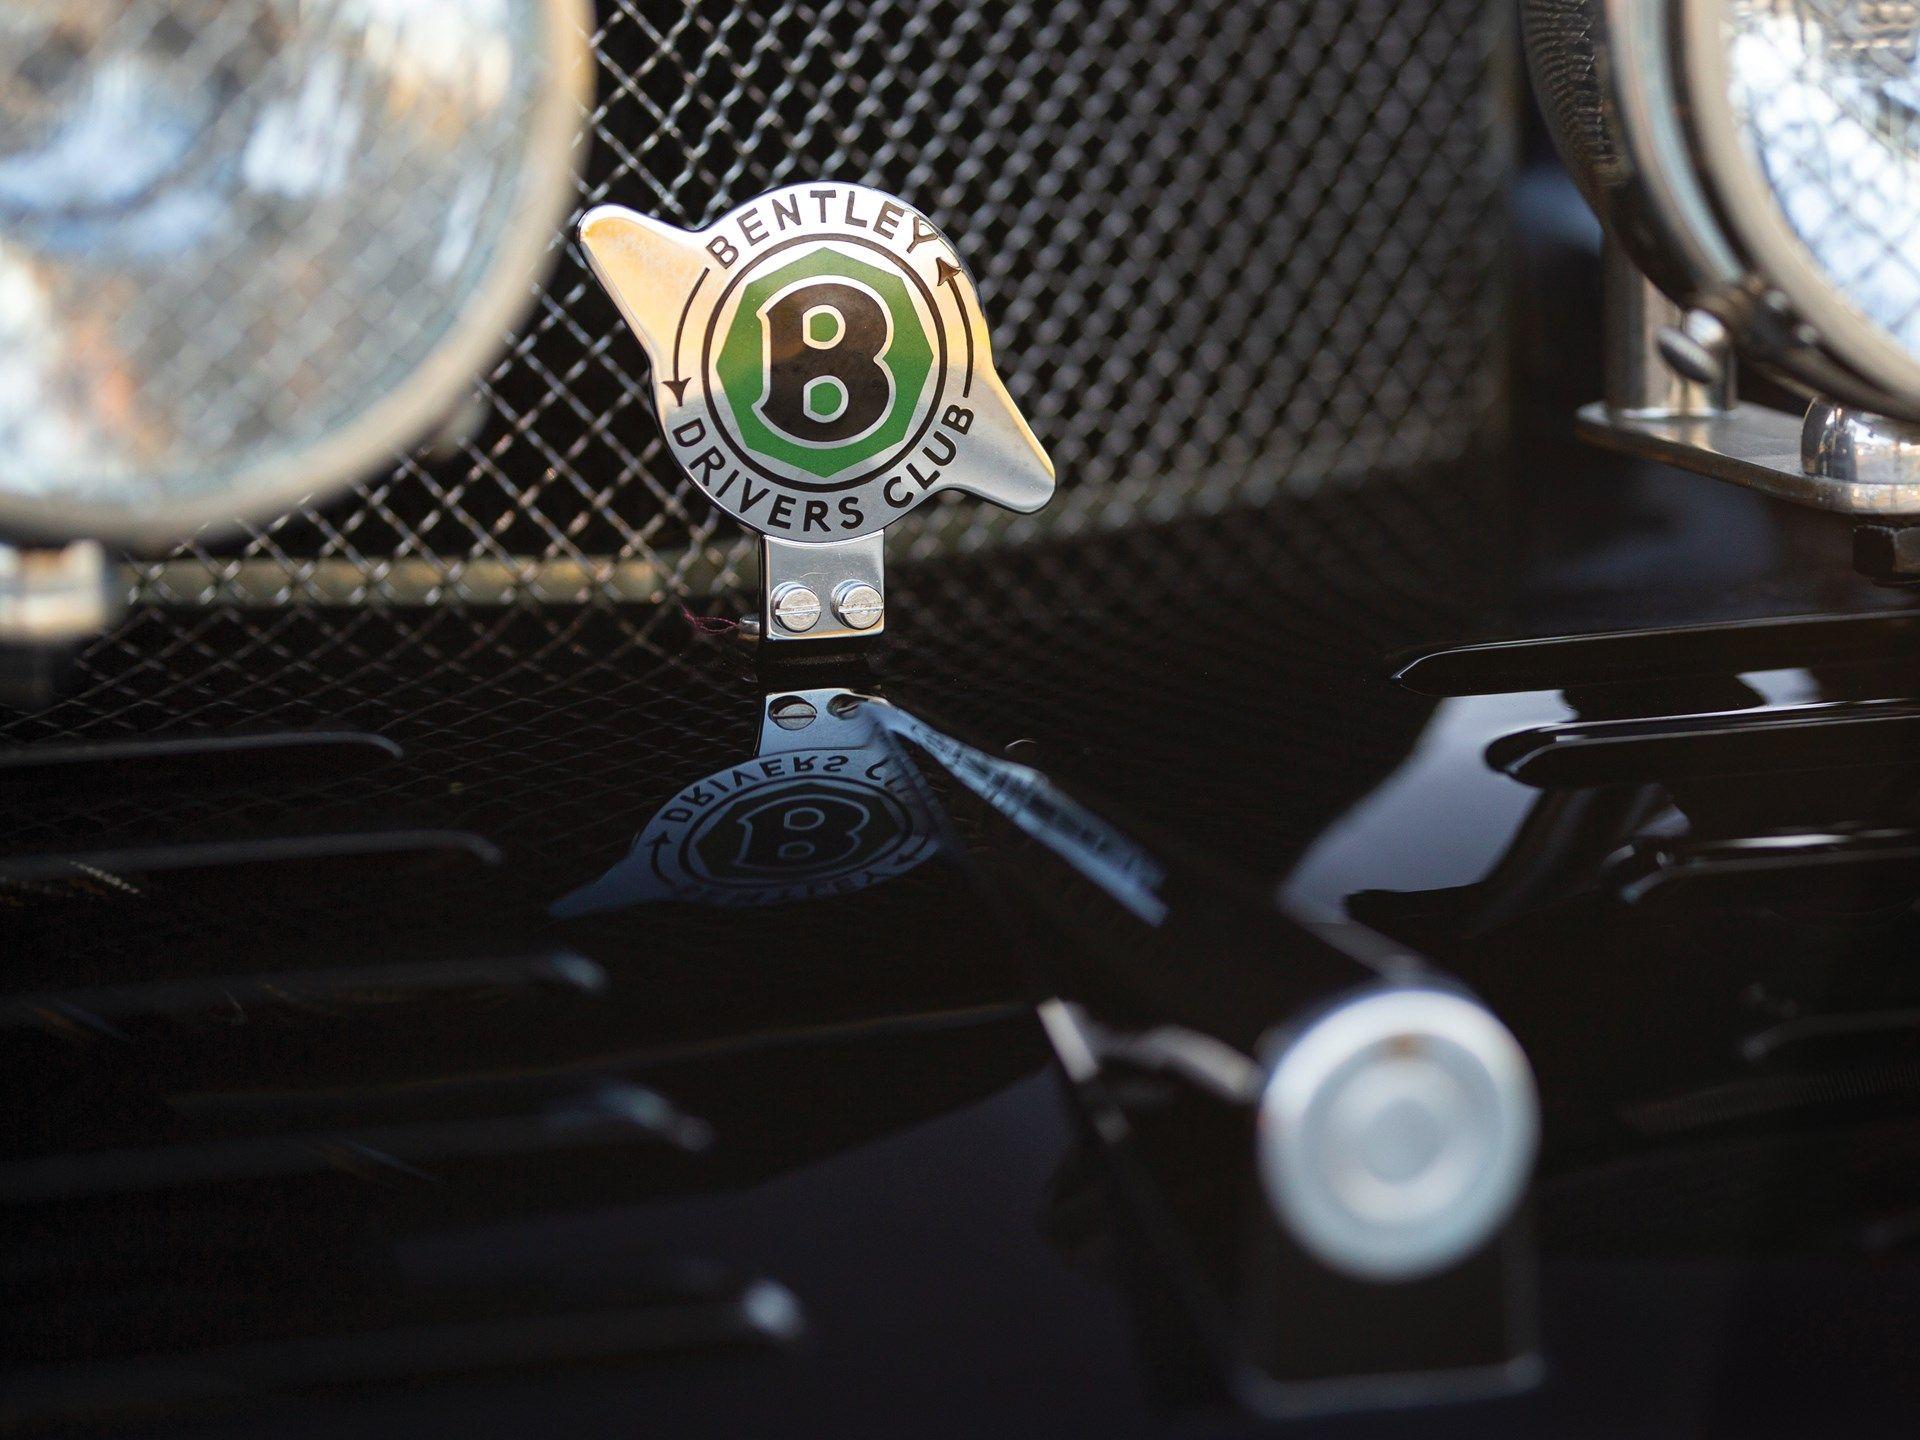 Blue and Green Train Logo - RM Sotheby's Bentley Blue Train Recreation